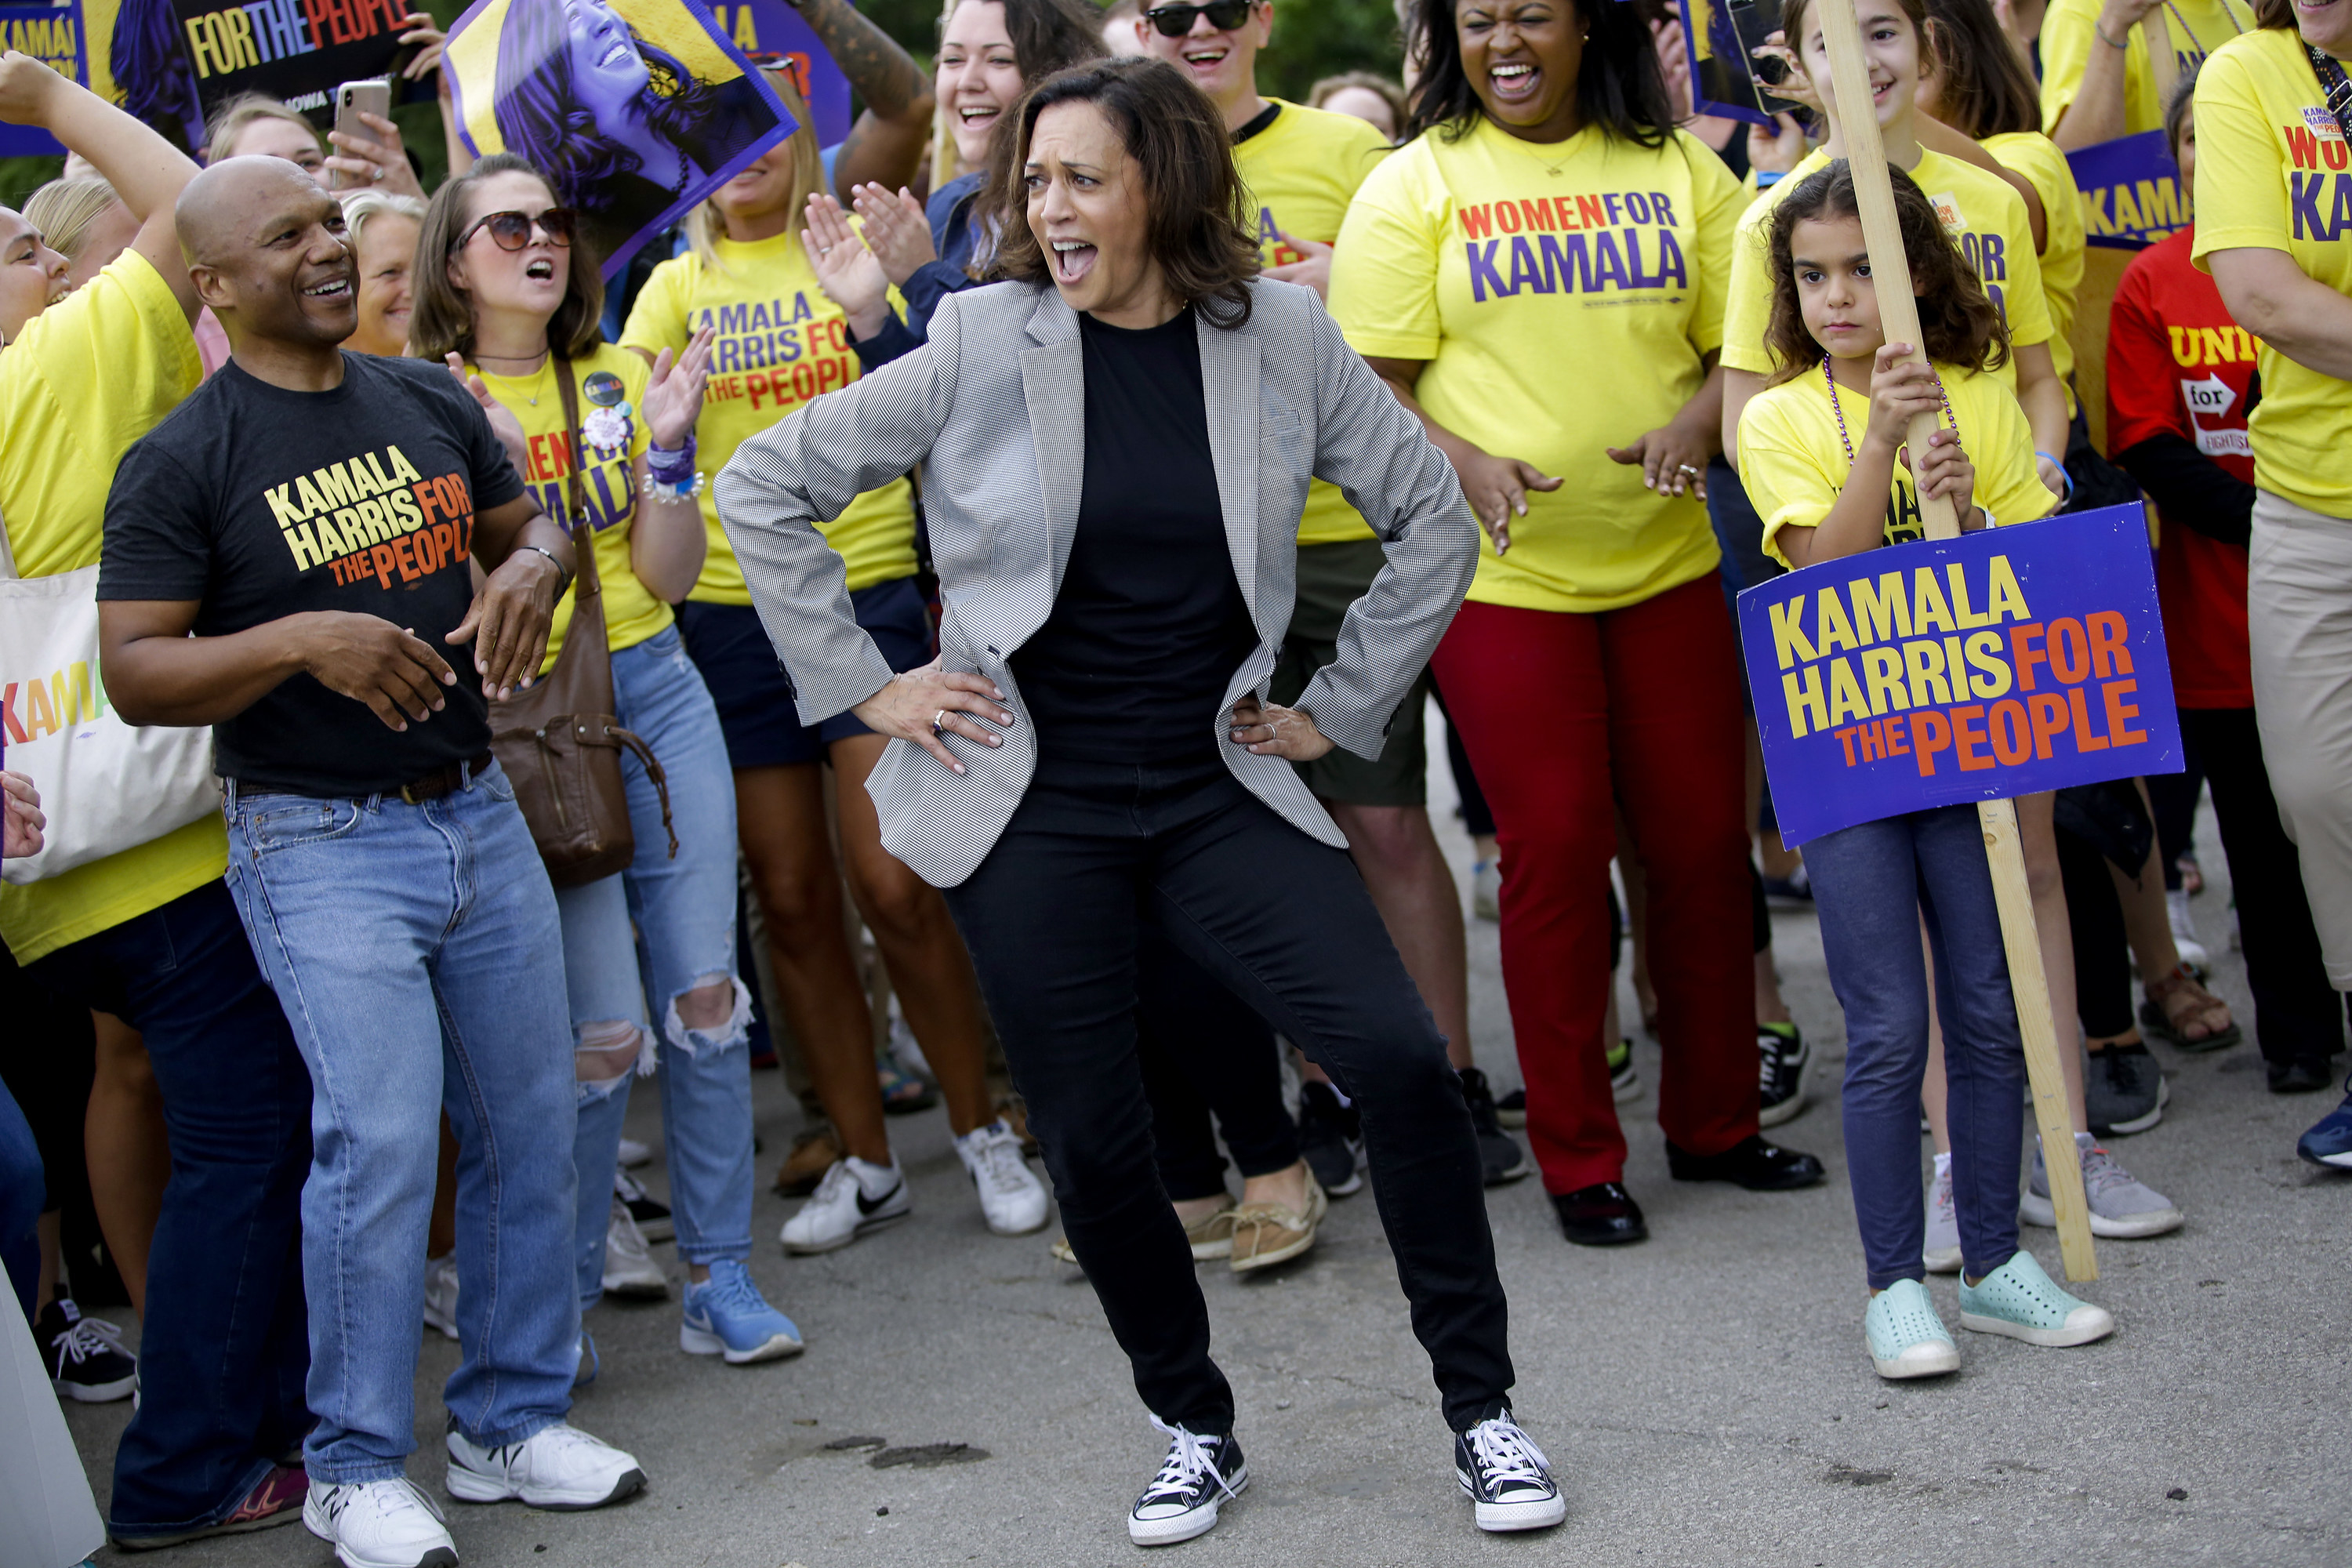 Kamala Harris, wearing black Converse sneakers, at a campaign event in California.